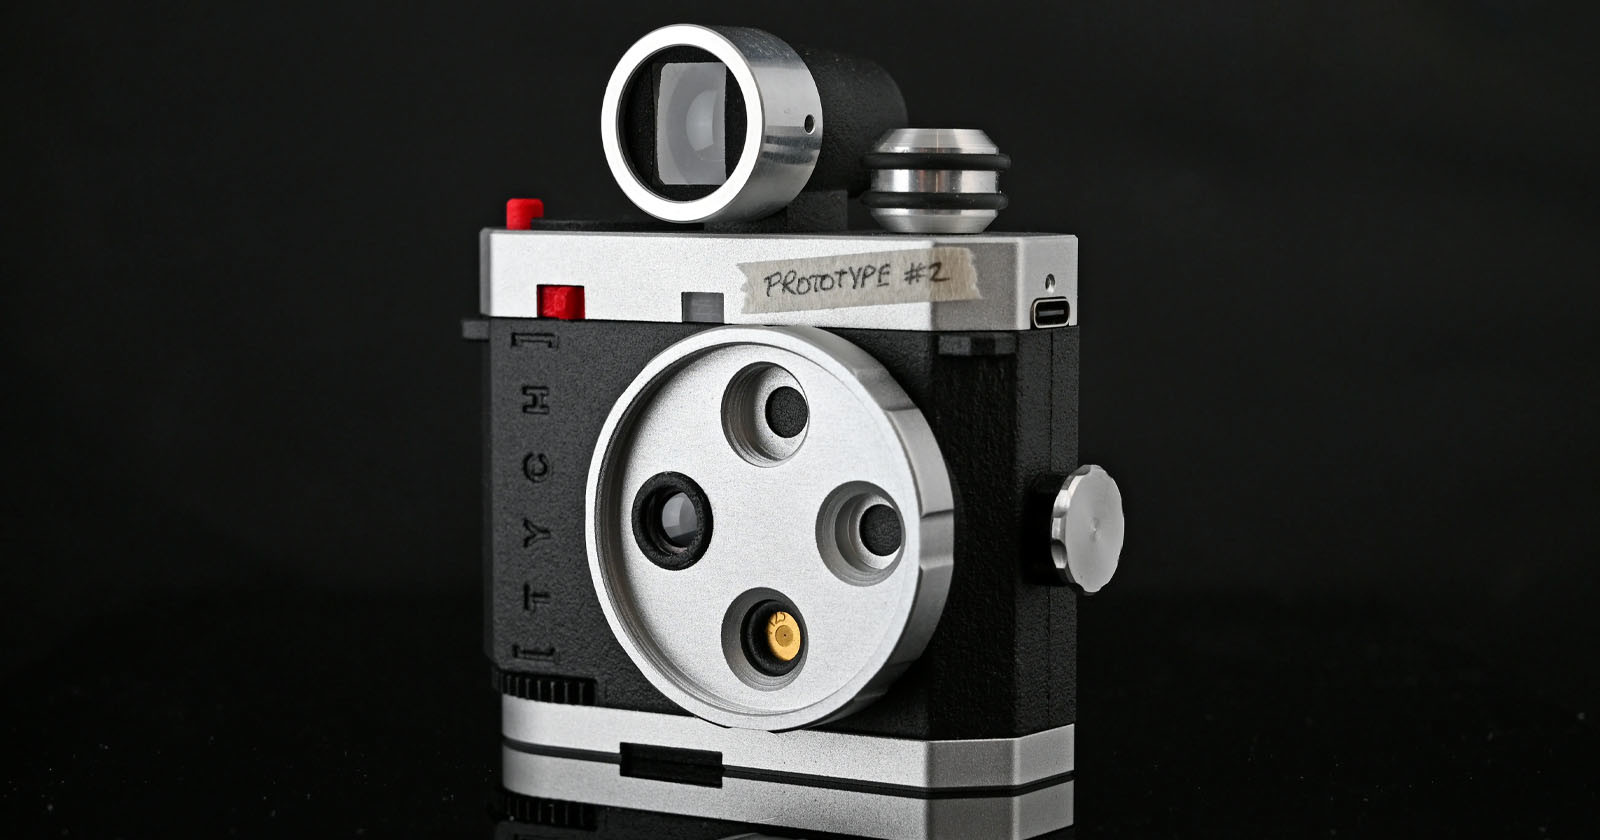 The Alfie is a 35mm Half-Frame Film Camera Looking for Beta Testers